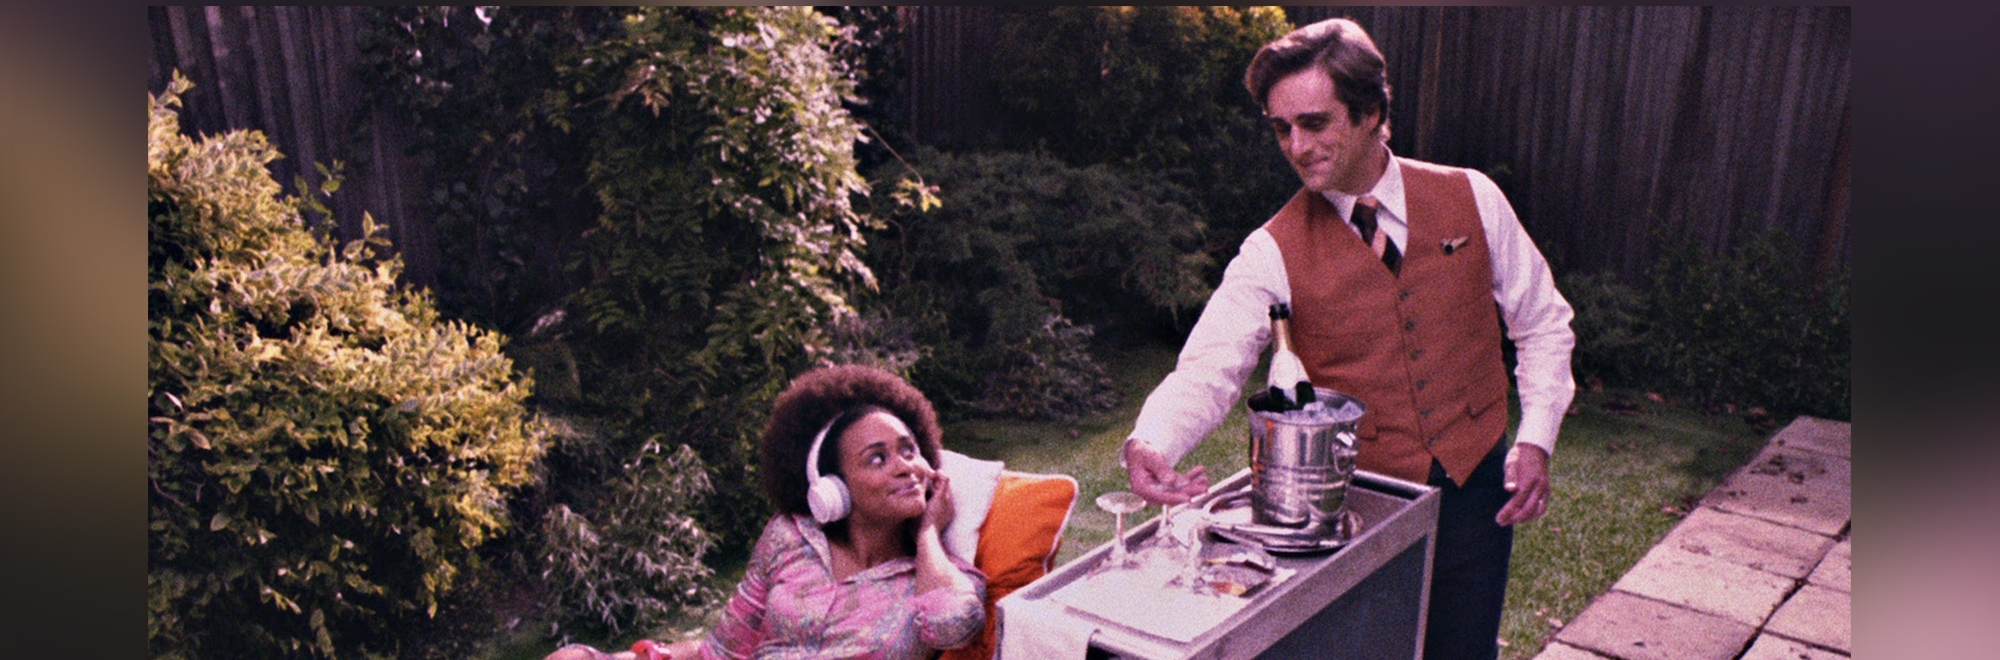 Audible’s new UK campaign offers summer travel with a vintage vibe